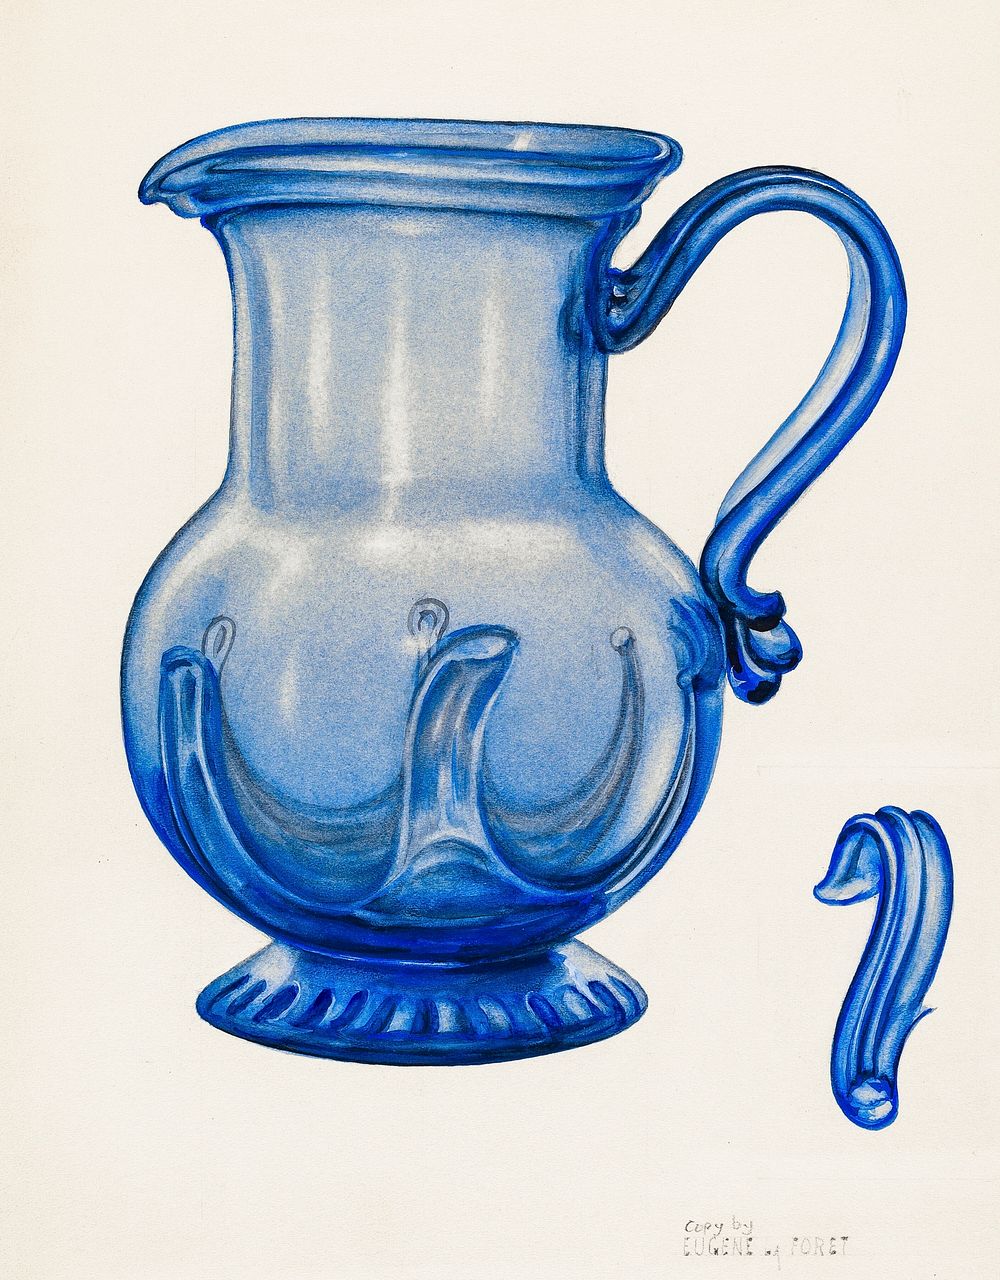 Pitcher (1935&ndash;1942) by Eugene la Foret. Original from The National Gallery of Art. Digitally enhanced by rawpixel.